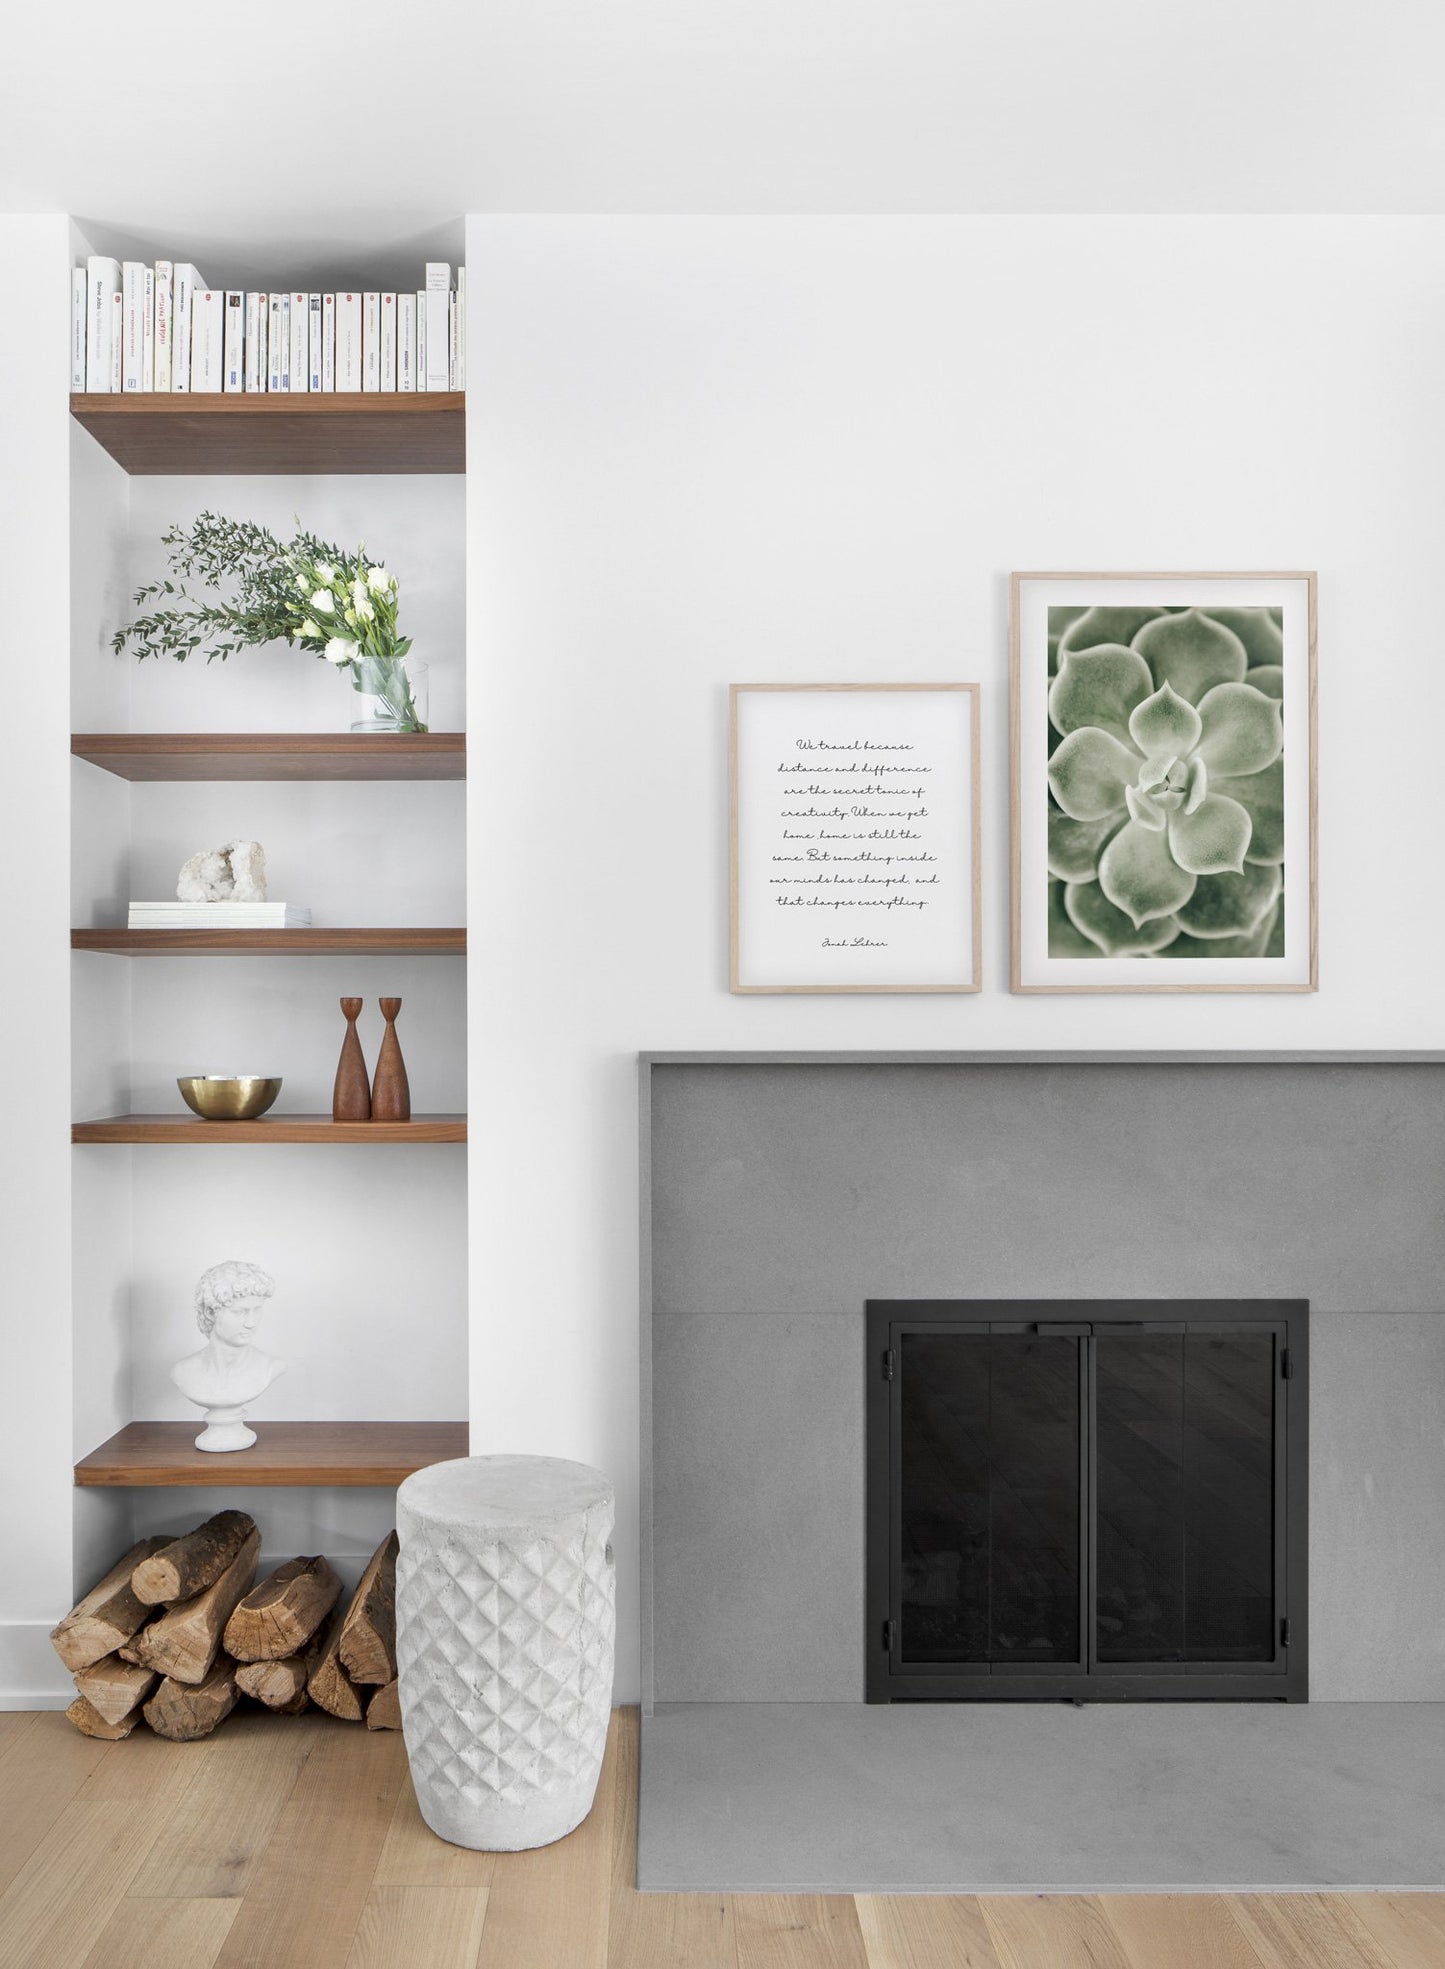 Minimalist poster duo featuring green Echevaria succulent botanical photography - Fireplace